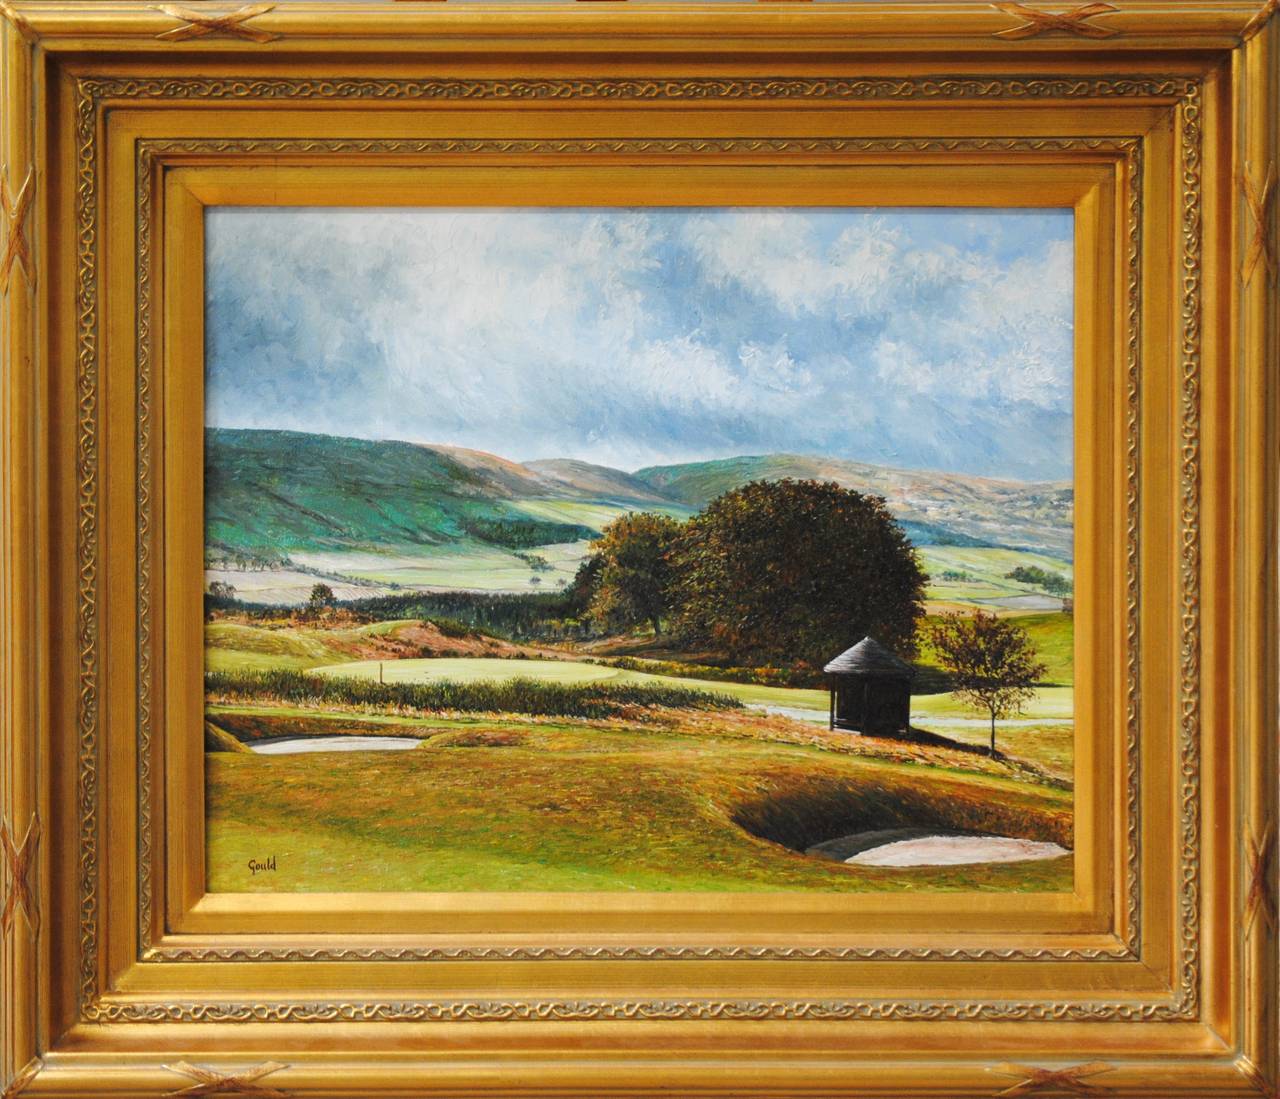 Gleneagles Golf Course, Scotland - Painting by Robert Gould